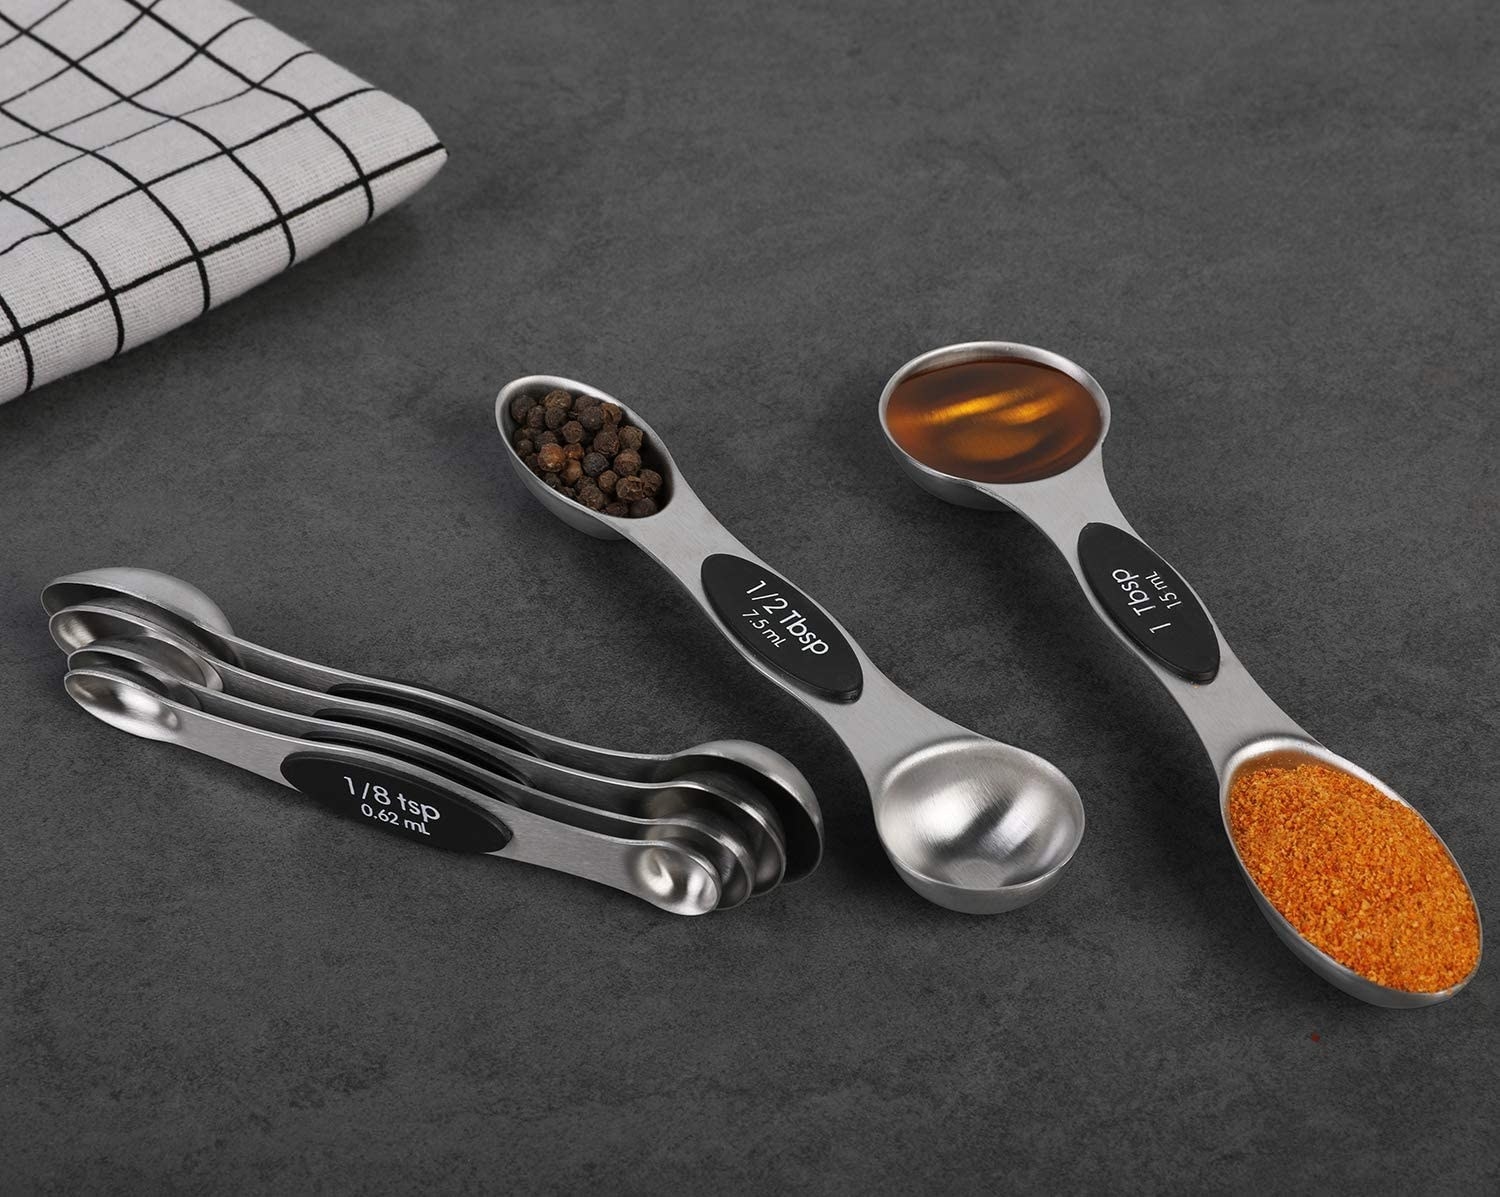 The set of measuring spoons holding different amounts of different ingredients